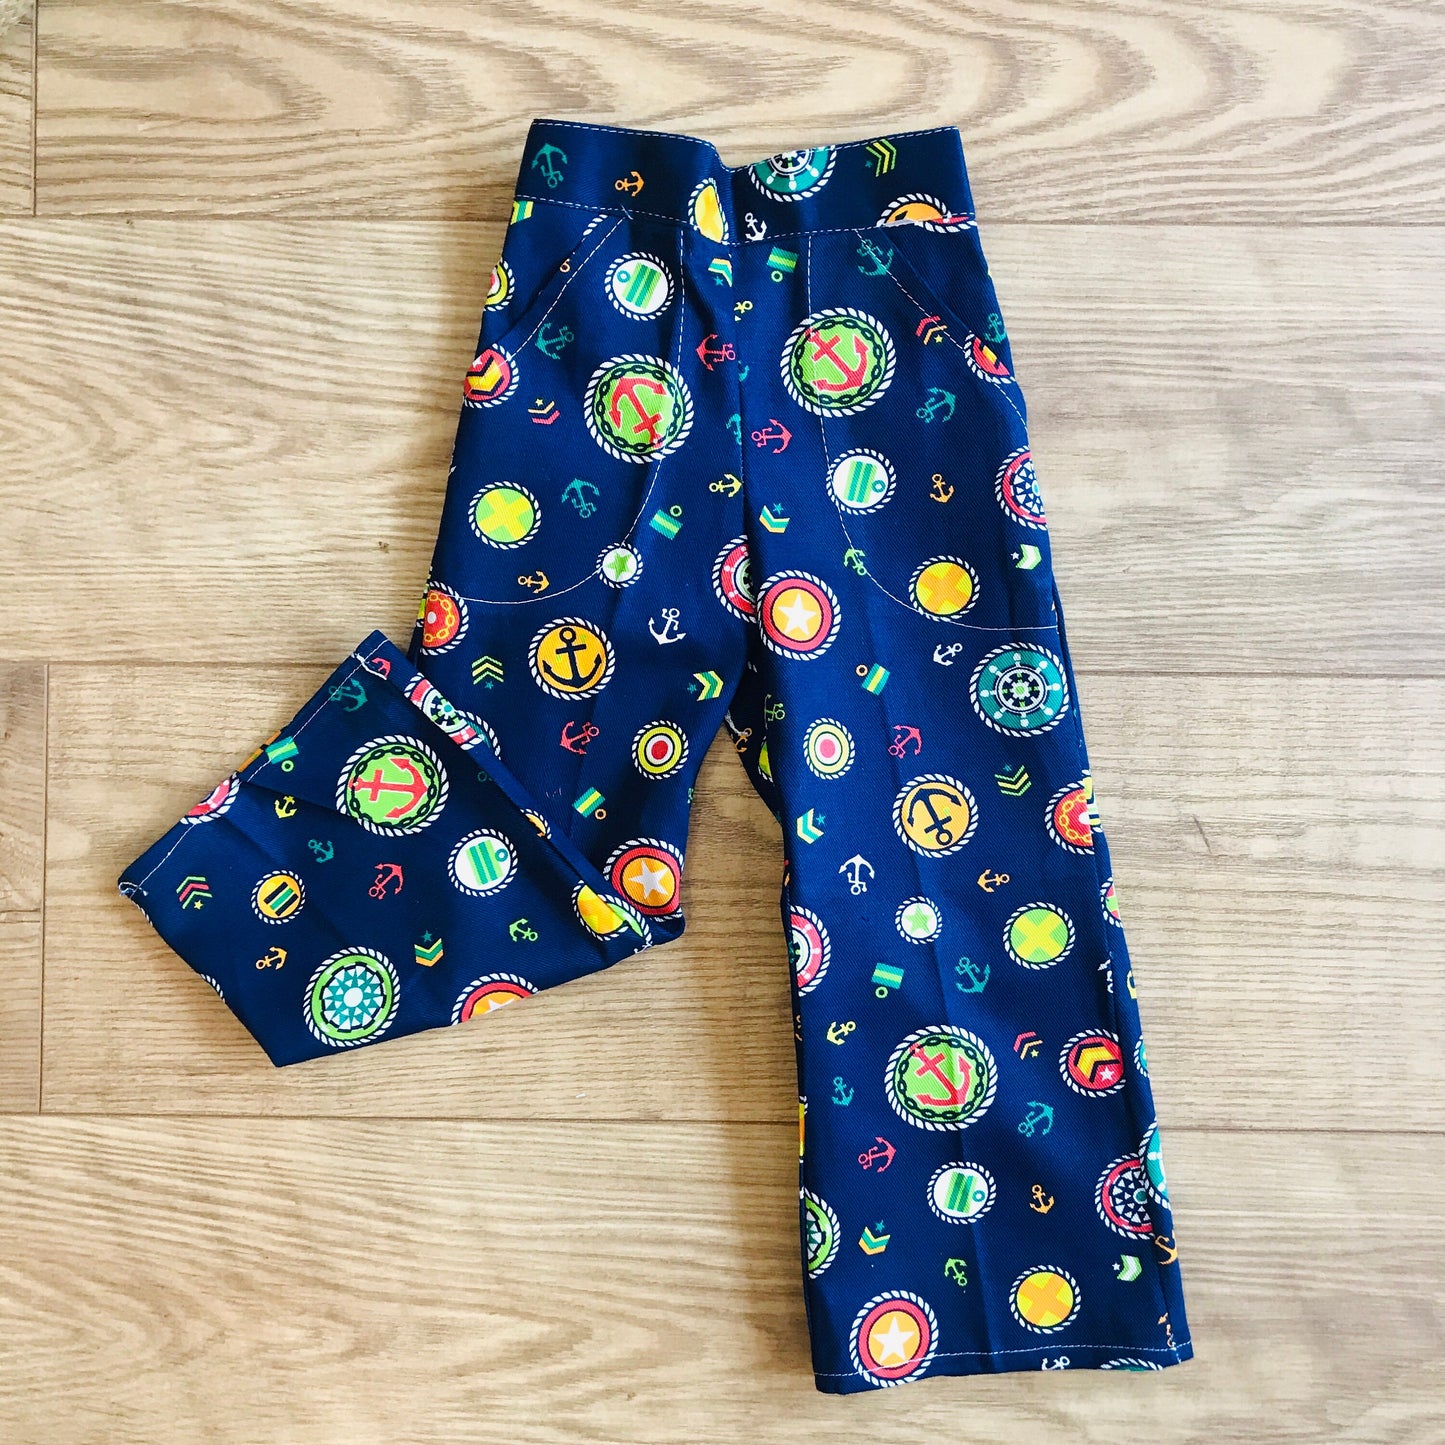 Vintage Deadstock  60s 70s Navy Nautical Printed Bell Bottoms 18-24M, 2-3 and 3-4Y